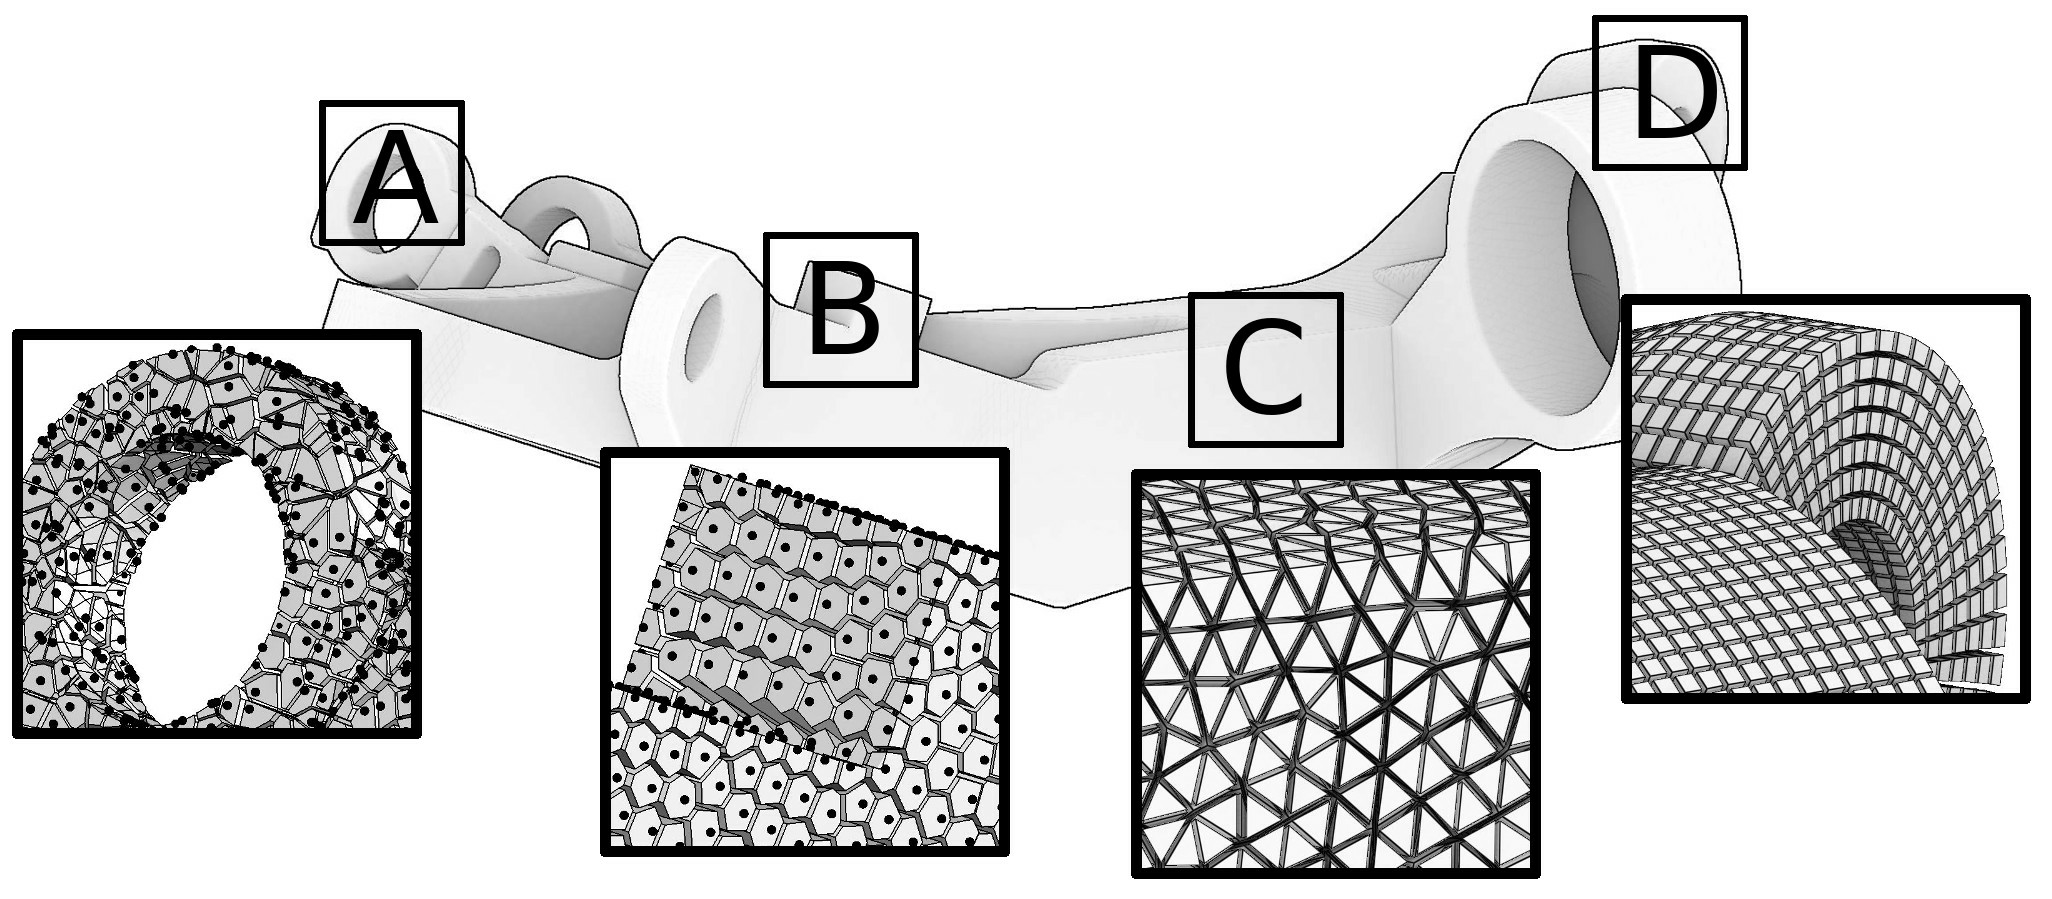 There is a wide range of possibilities to discretize a given domain. (A) Completely unstructured, white noise point sampling;
(B) Blue noise point sampling exhibits some structure; (C) tetrahedral mesh; (D) hexahedral mesh.